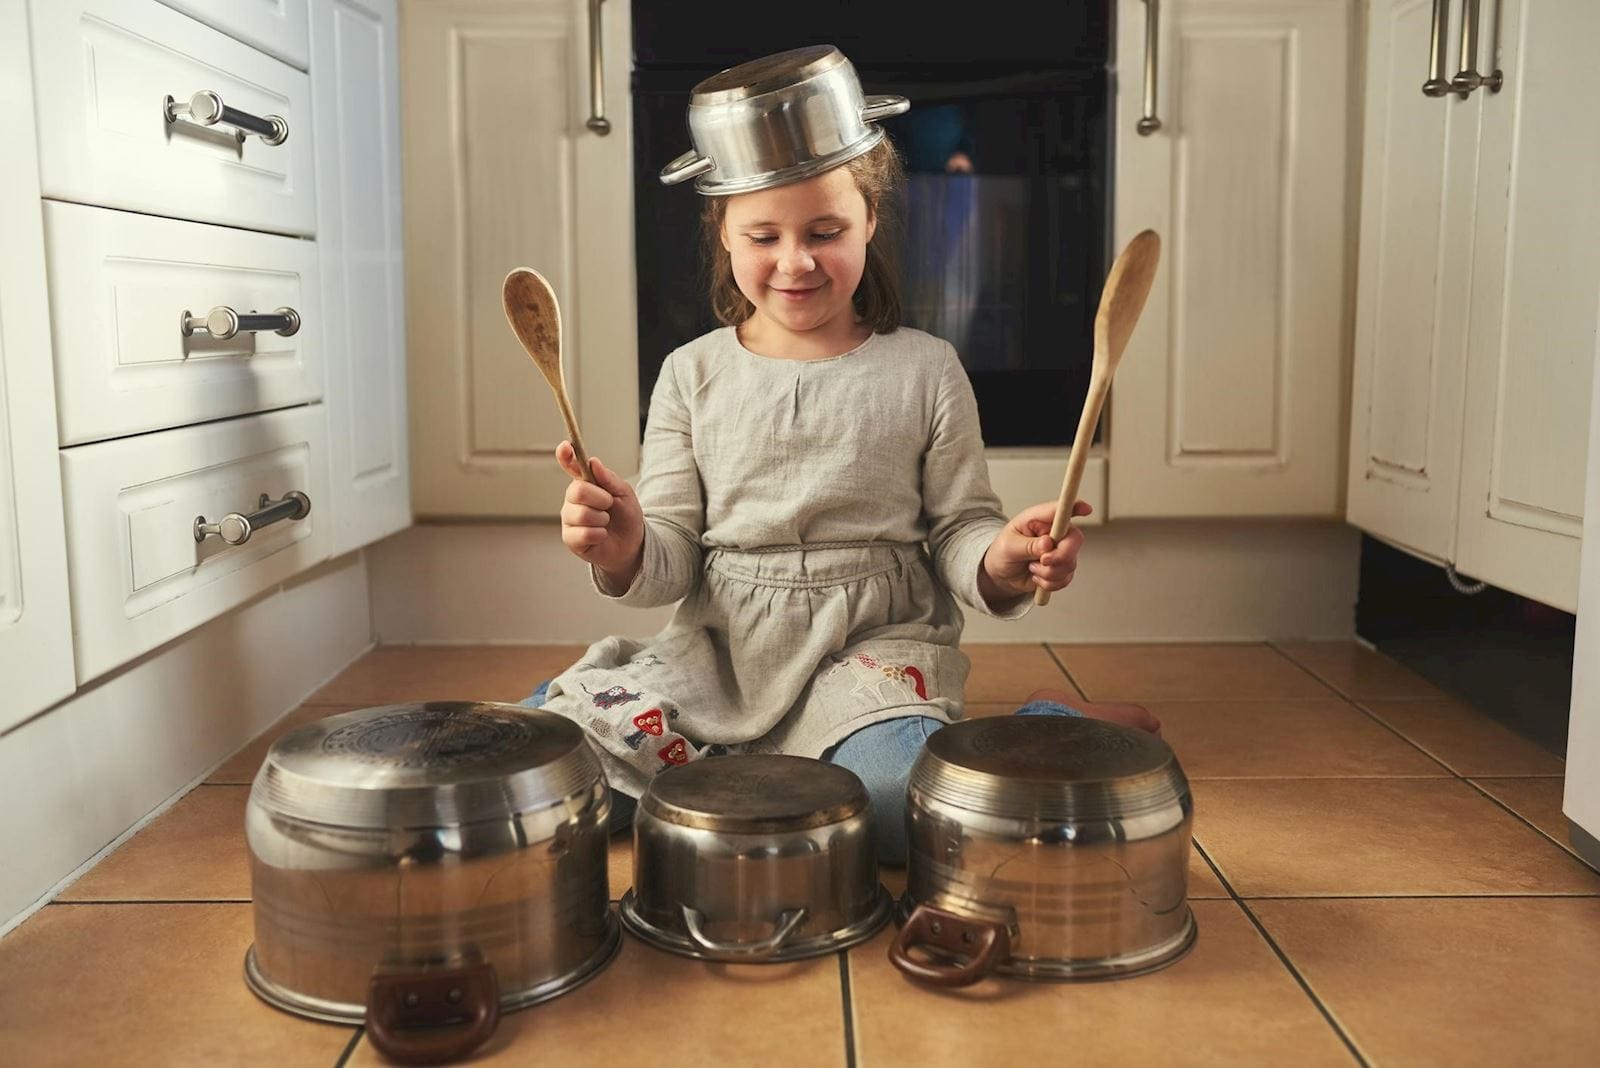 Child with ADHD banging on pots and pans with wooden spoons